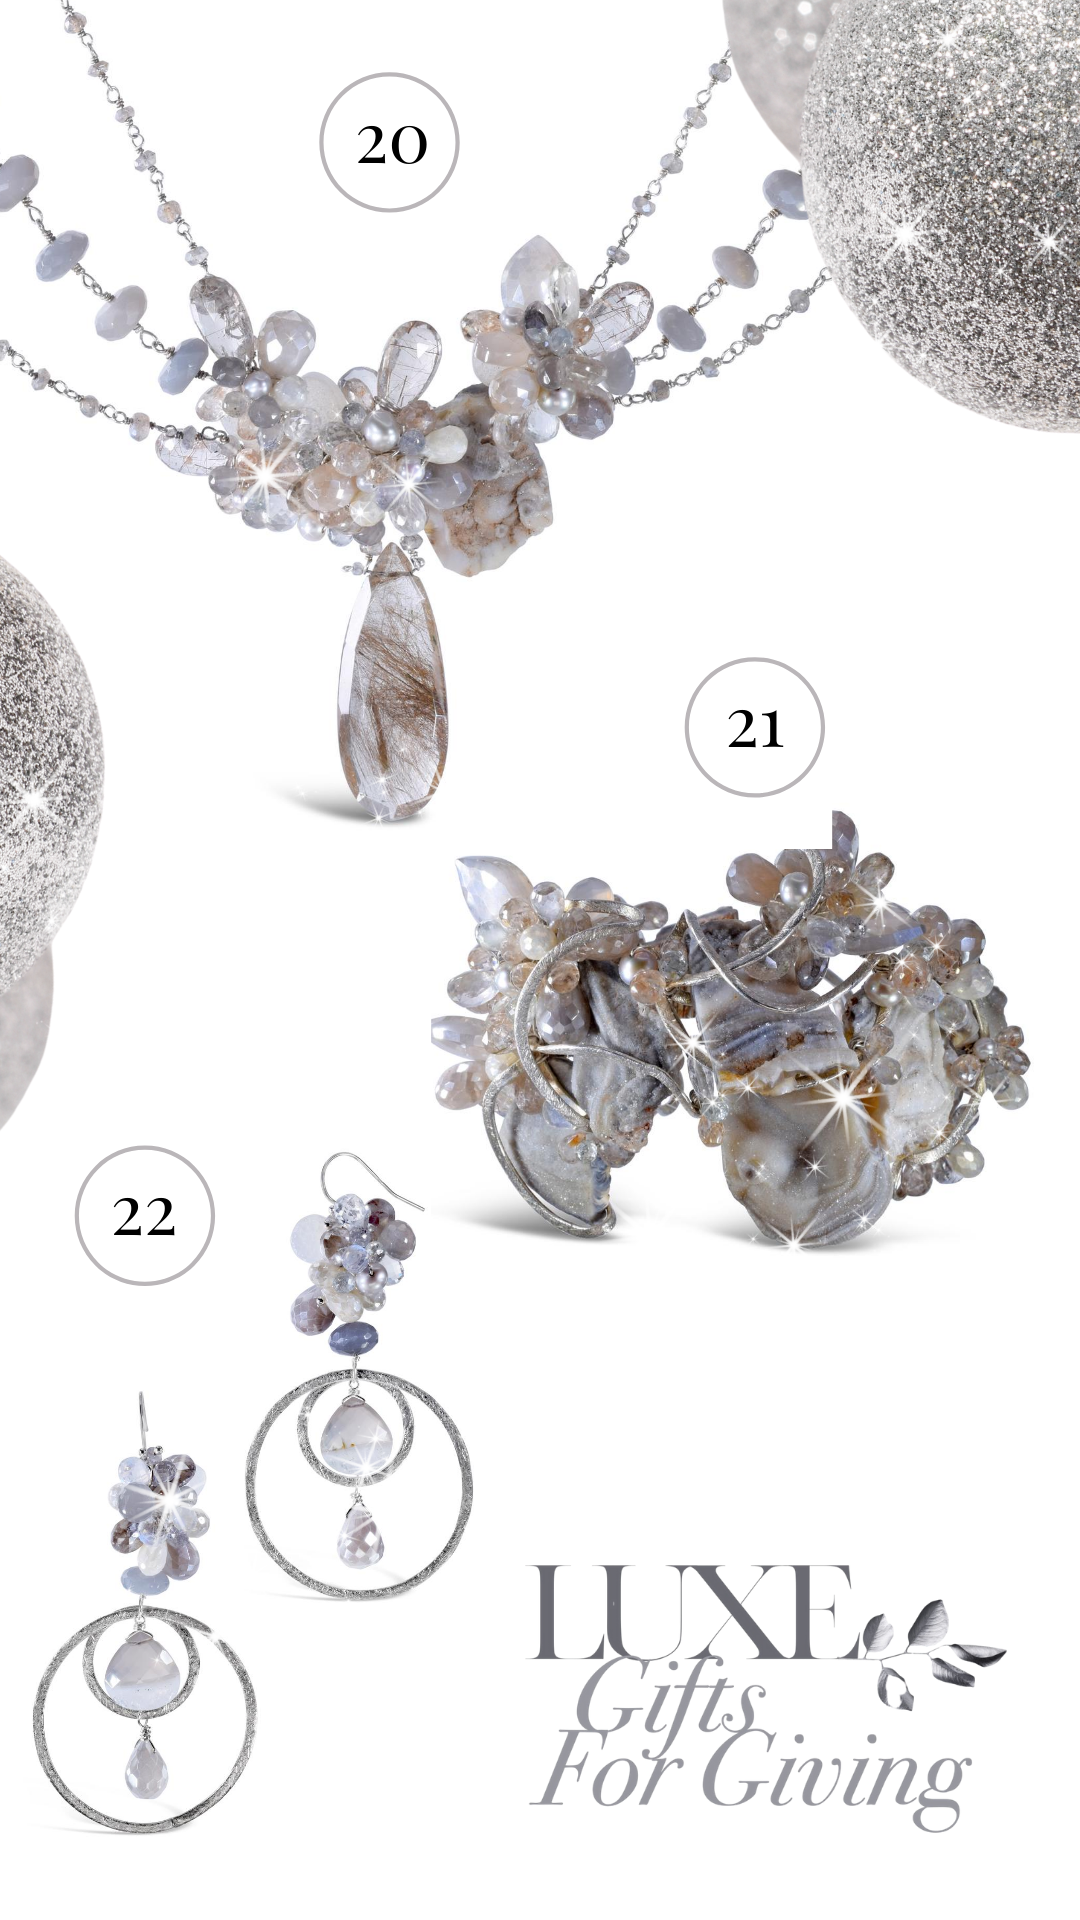  Andrea Li Jewelry Holiday Gift Guide